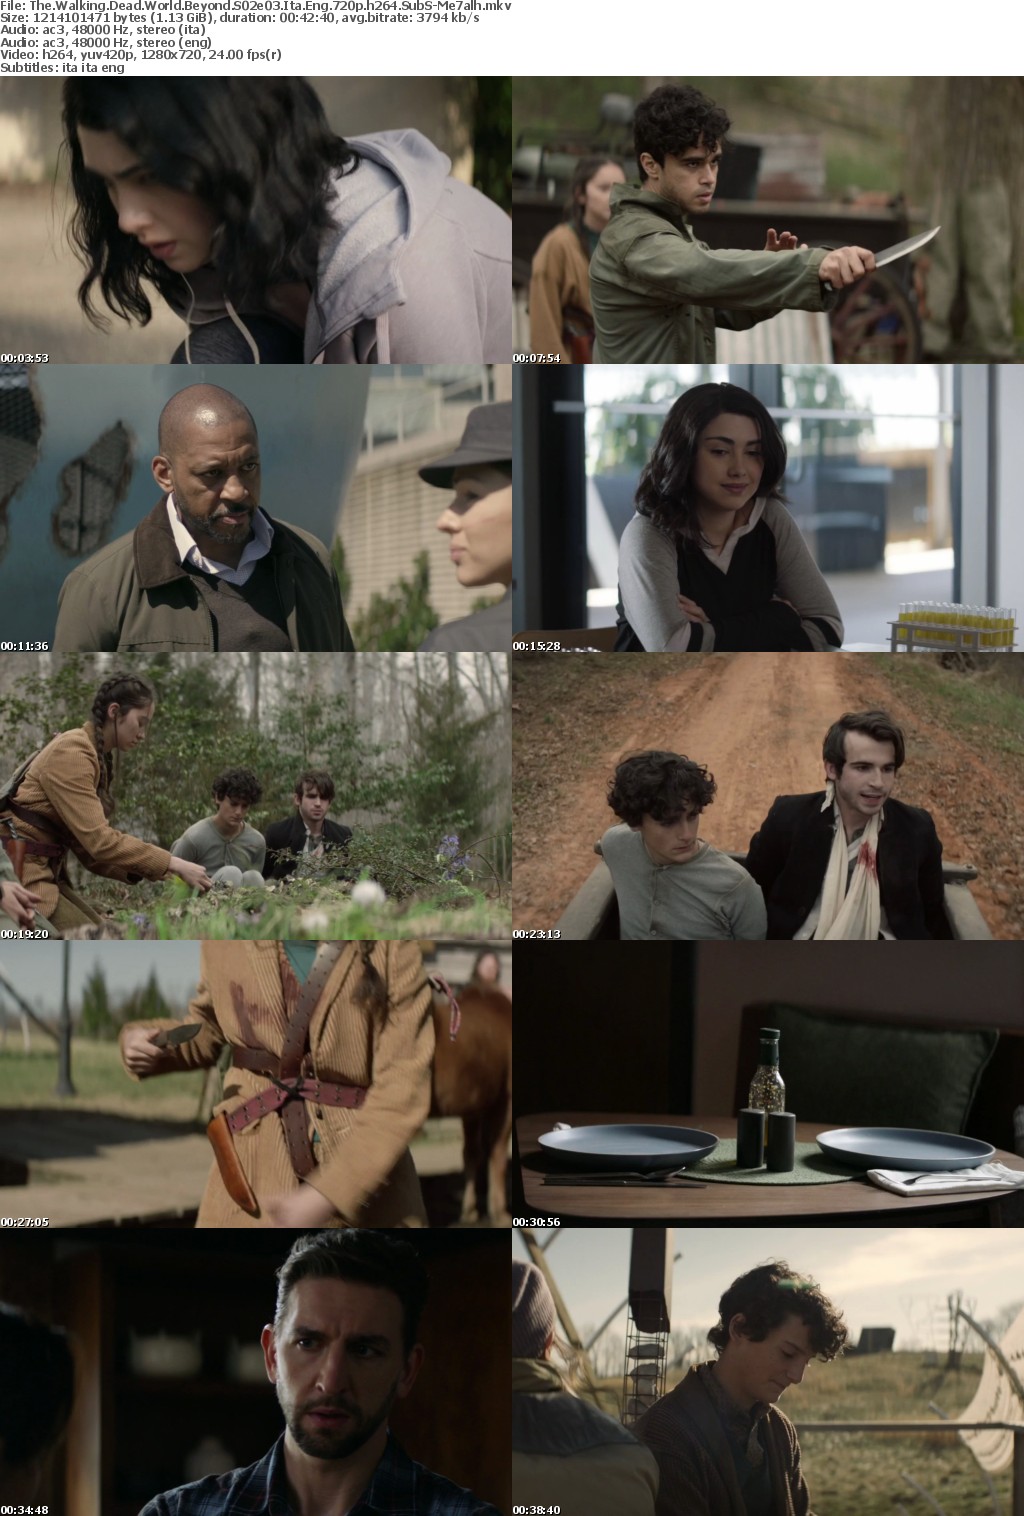 The Walking Dead: World Beyond S02e03 720p Ita Eng SubS MirCrewRelease byMe7alh